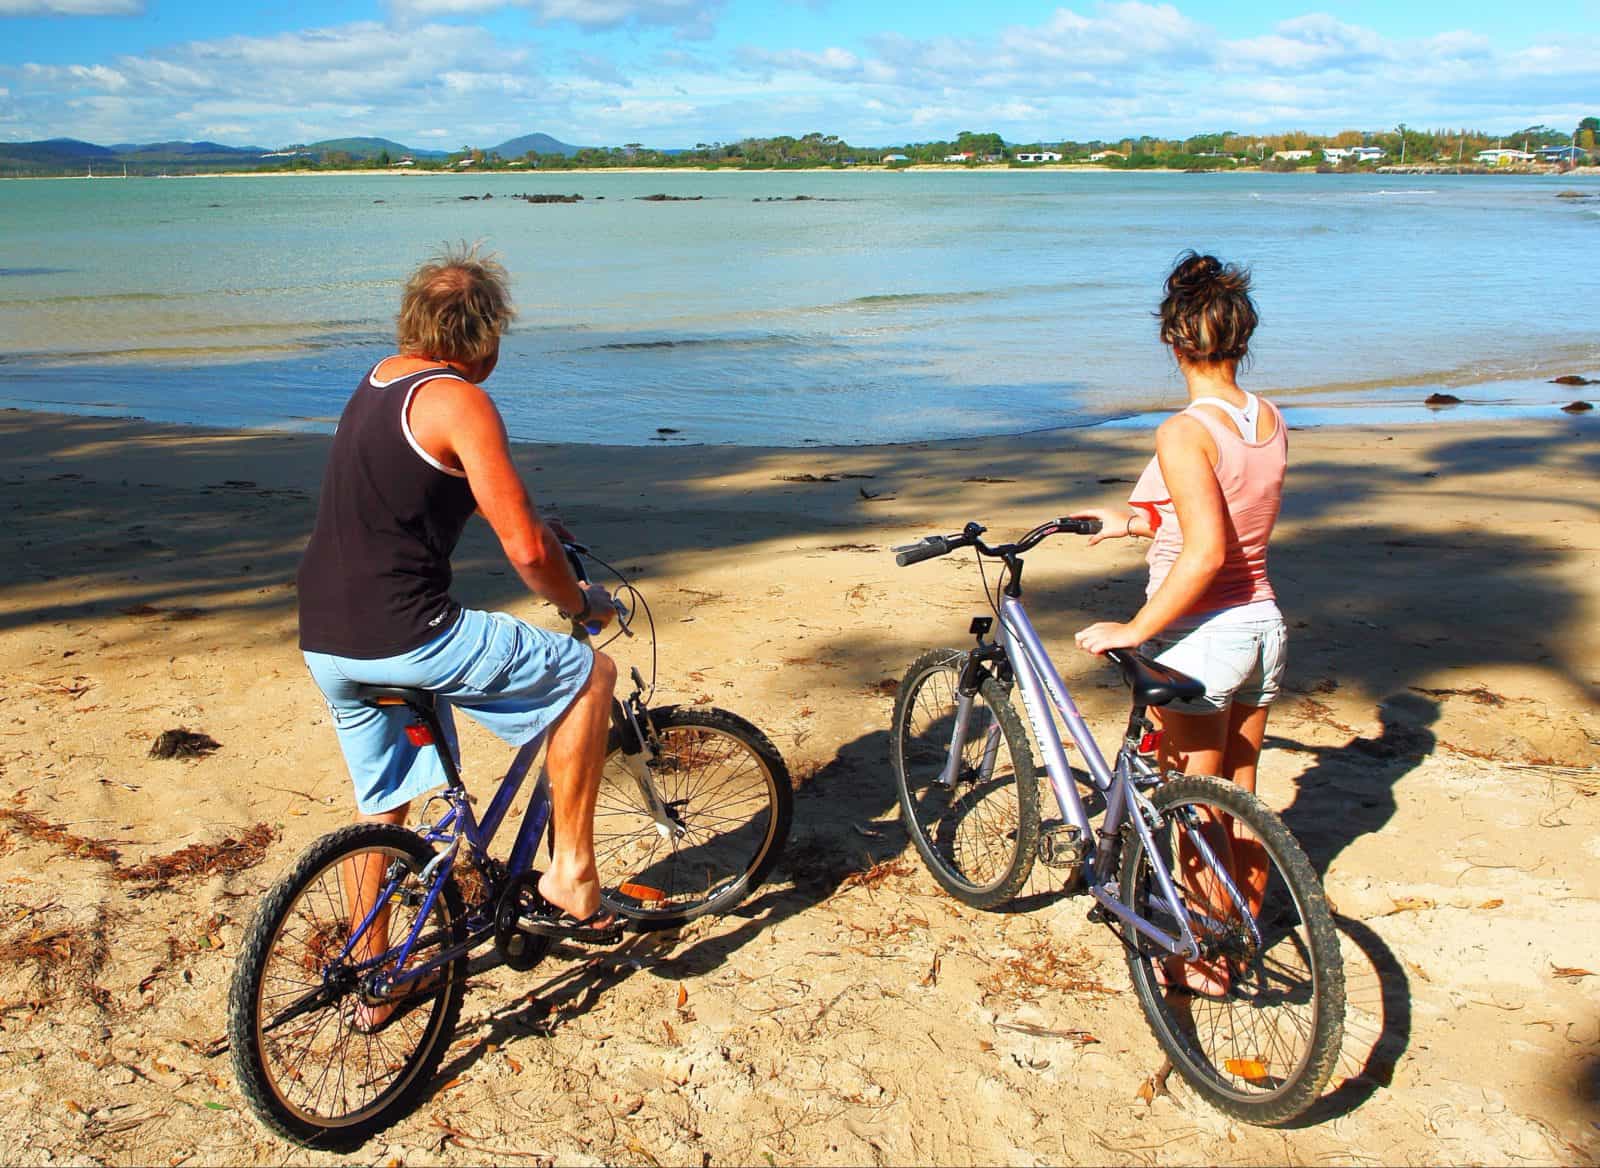 Two people on the beach with their bikes